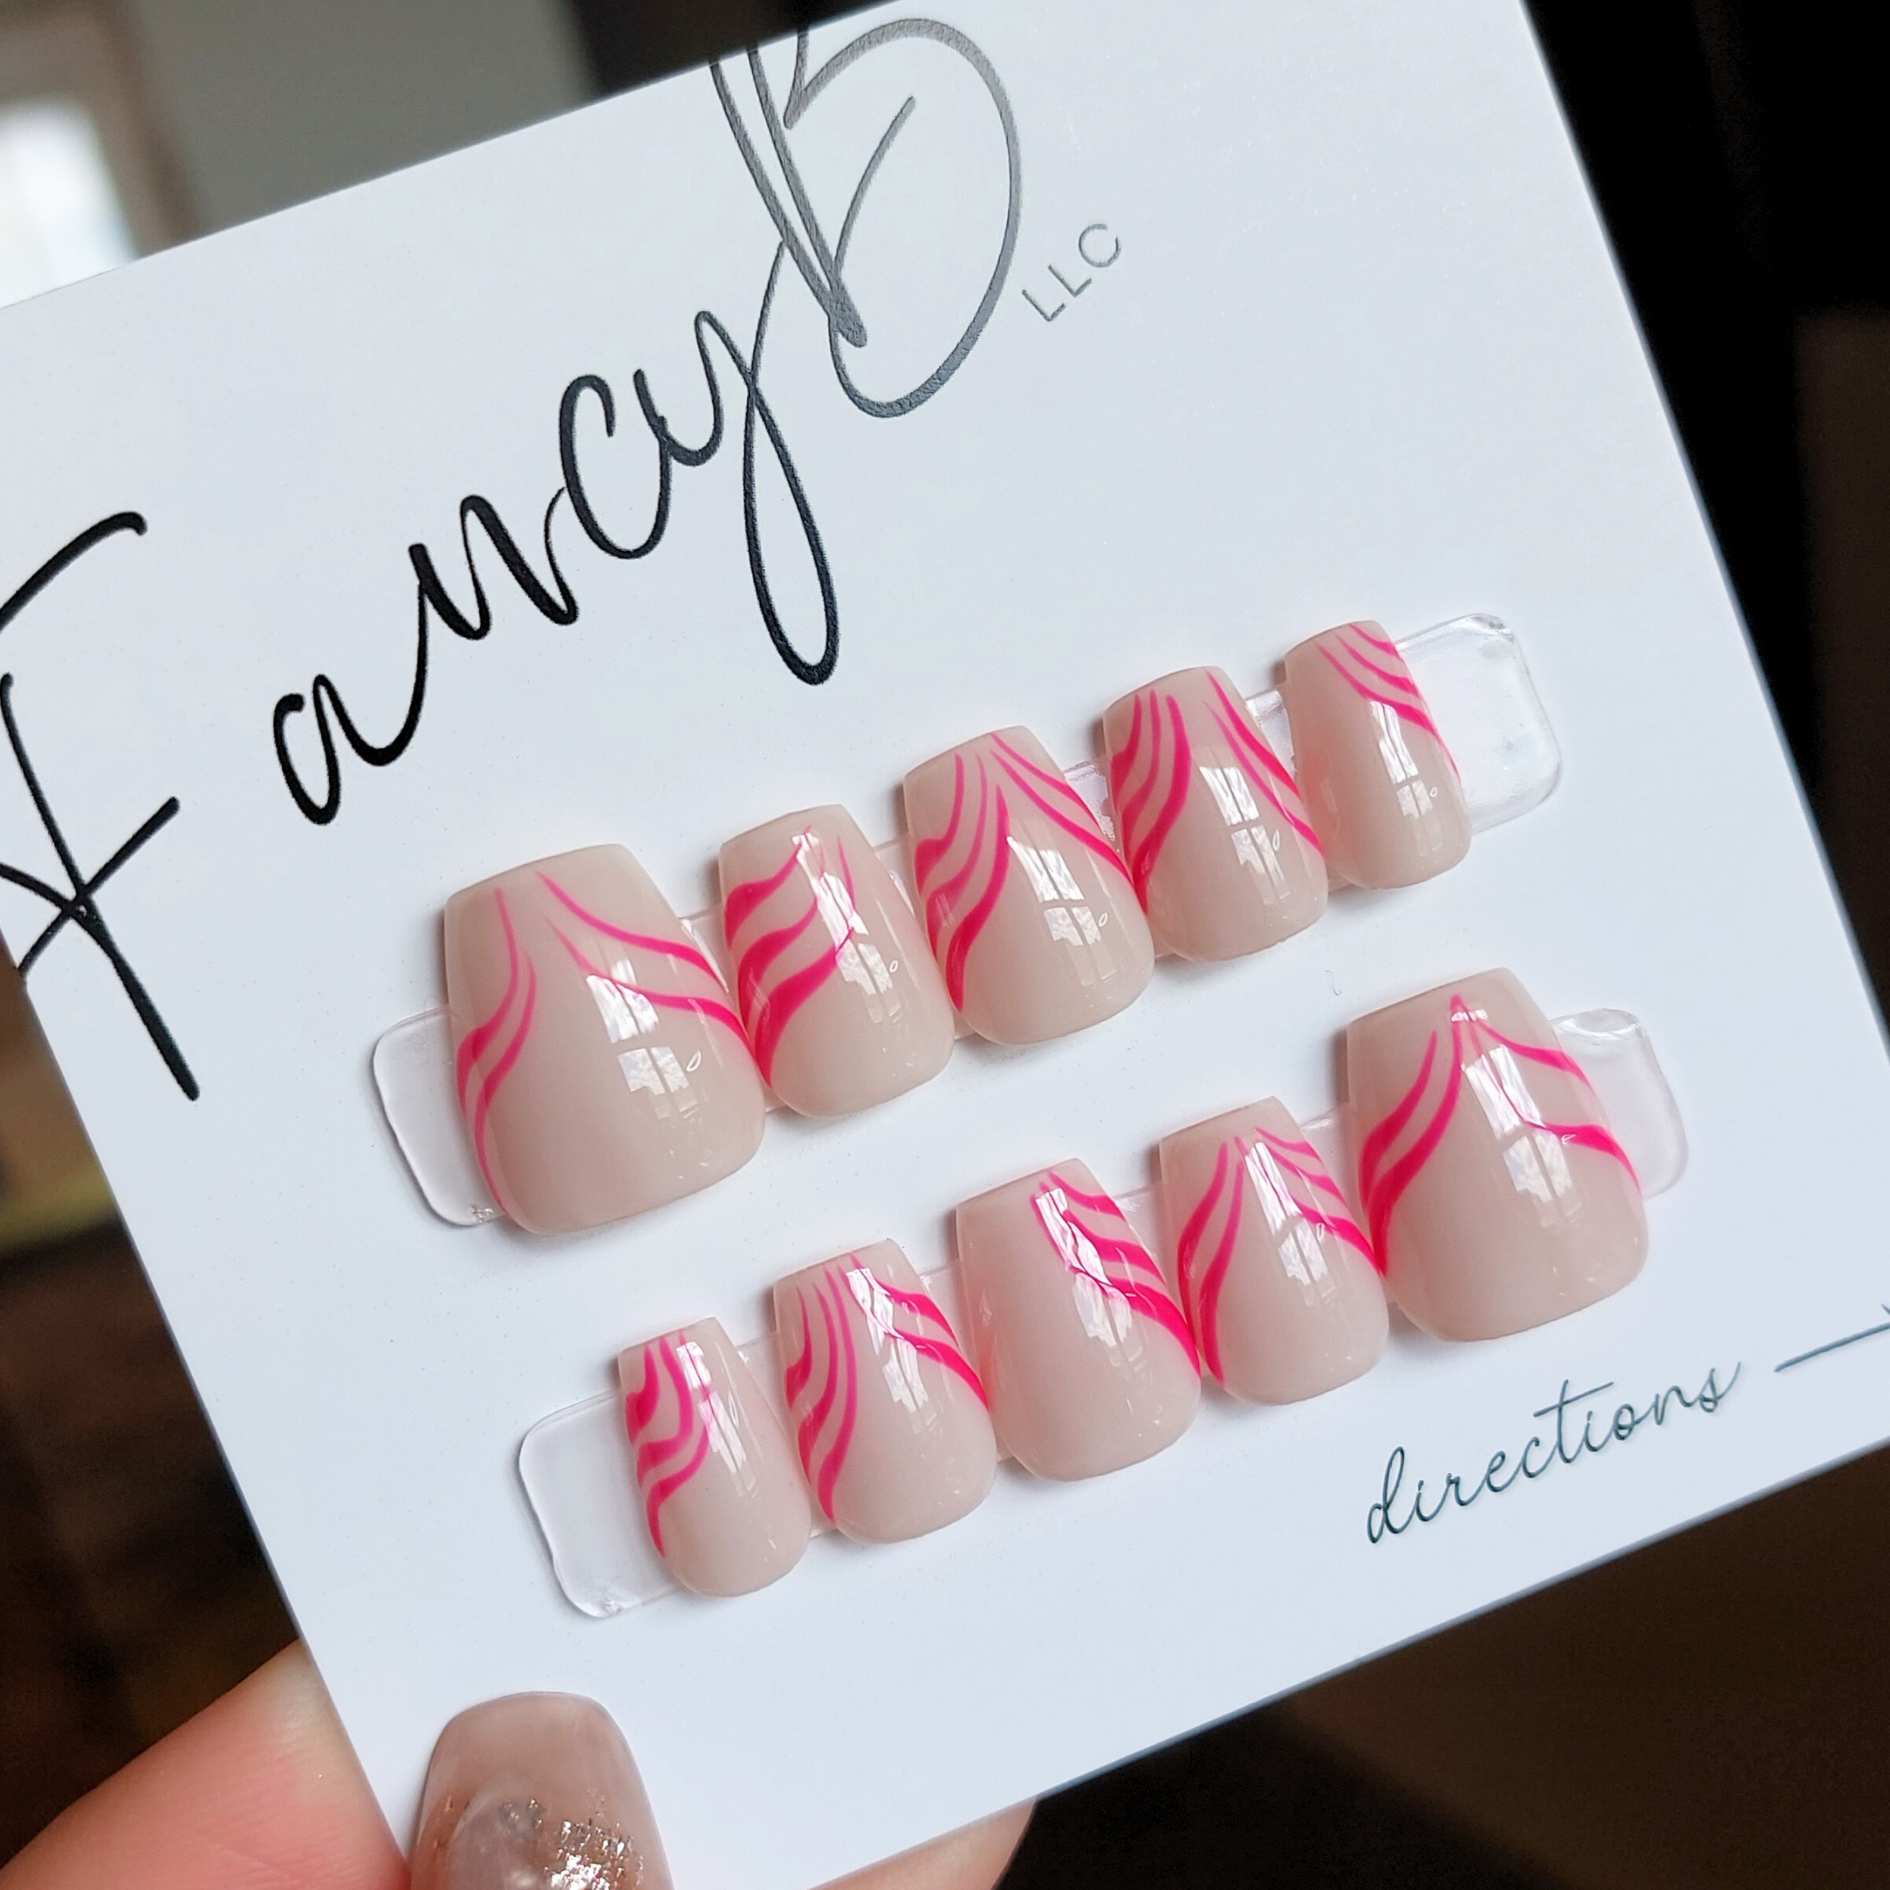 custom pink stripe nails, press on nails with nude color and hot neon pink curvy stripes on extra short coffin nails from fancyb press on nails